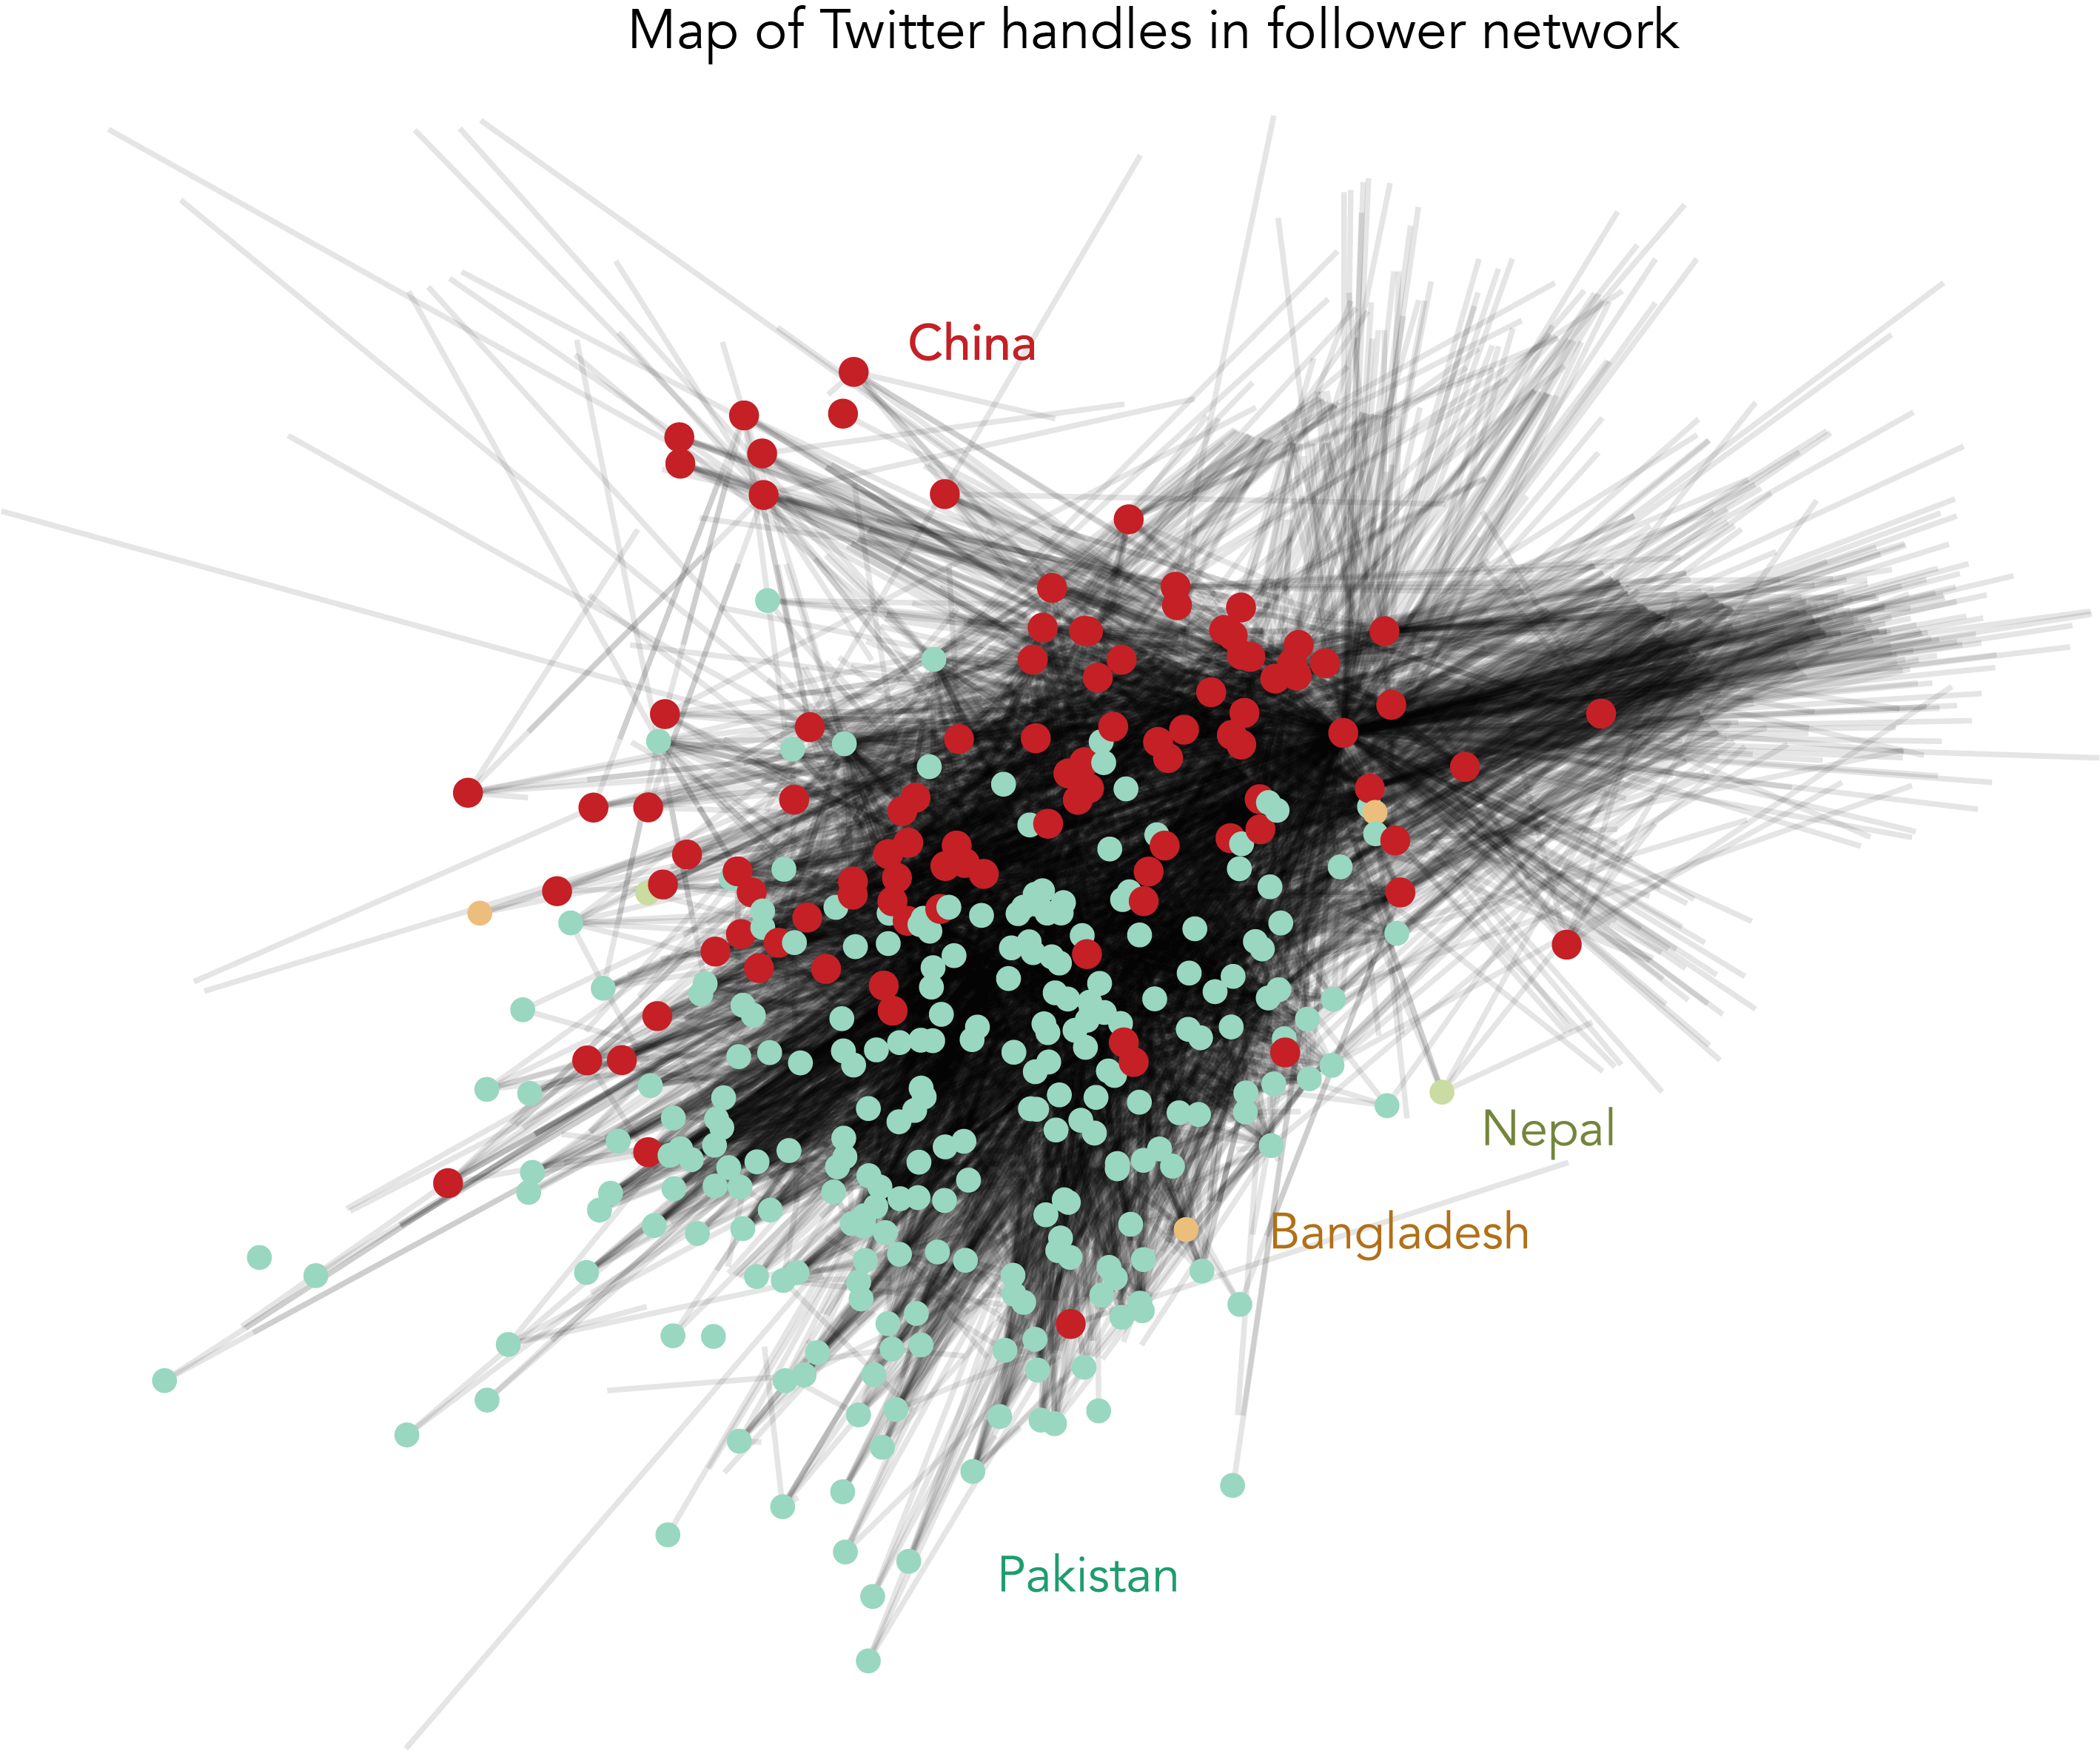 Clustering of Twitter connecton points.